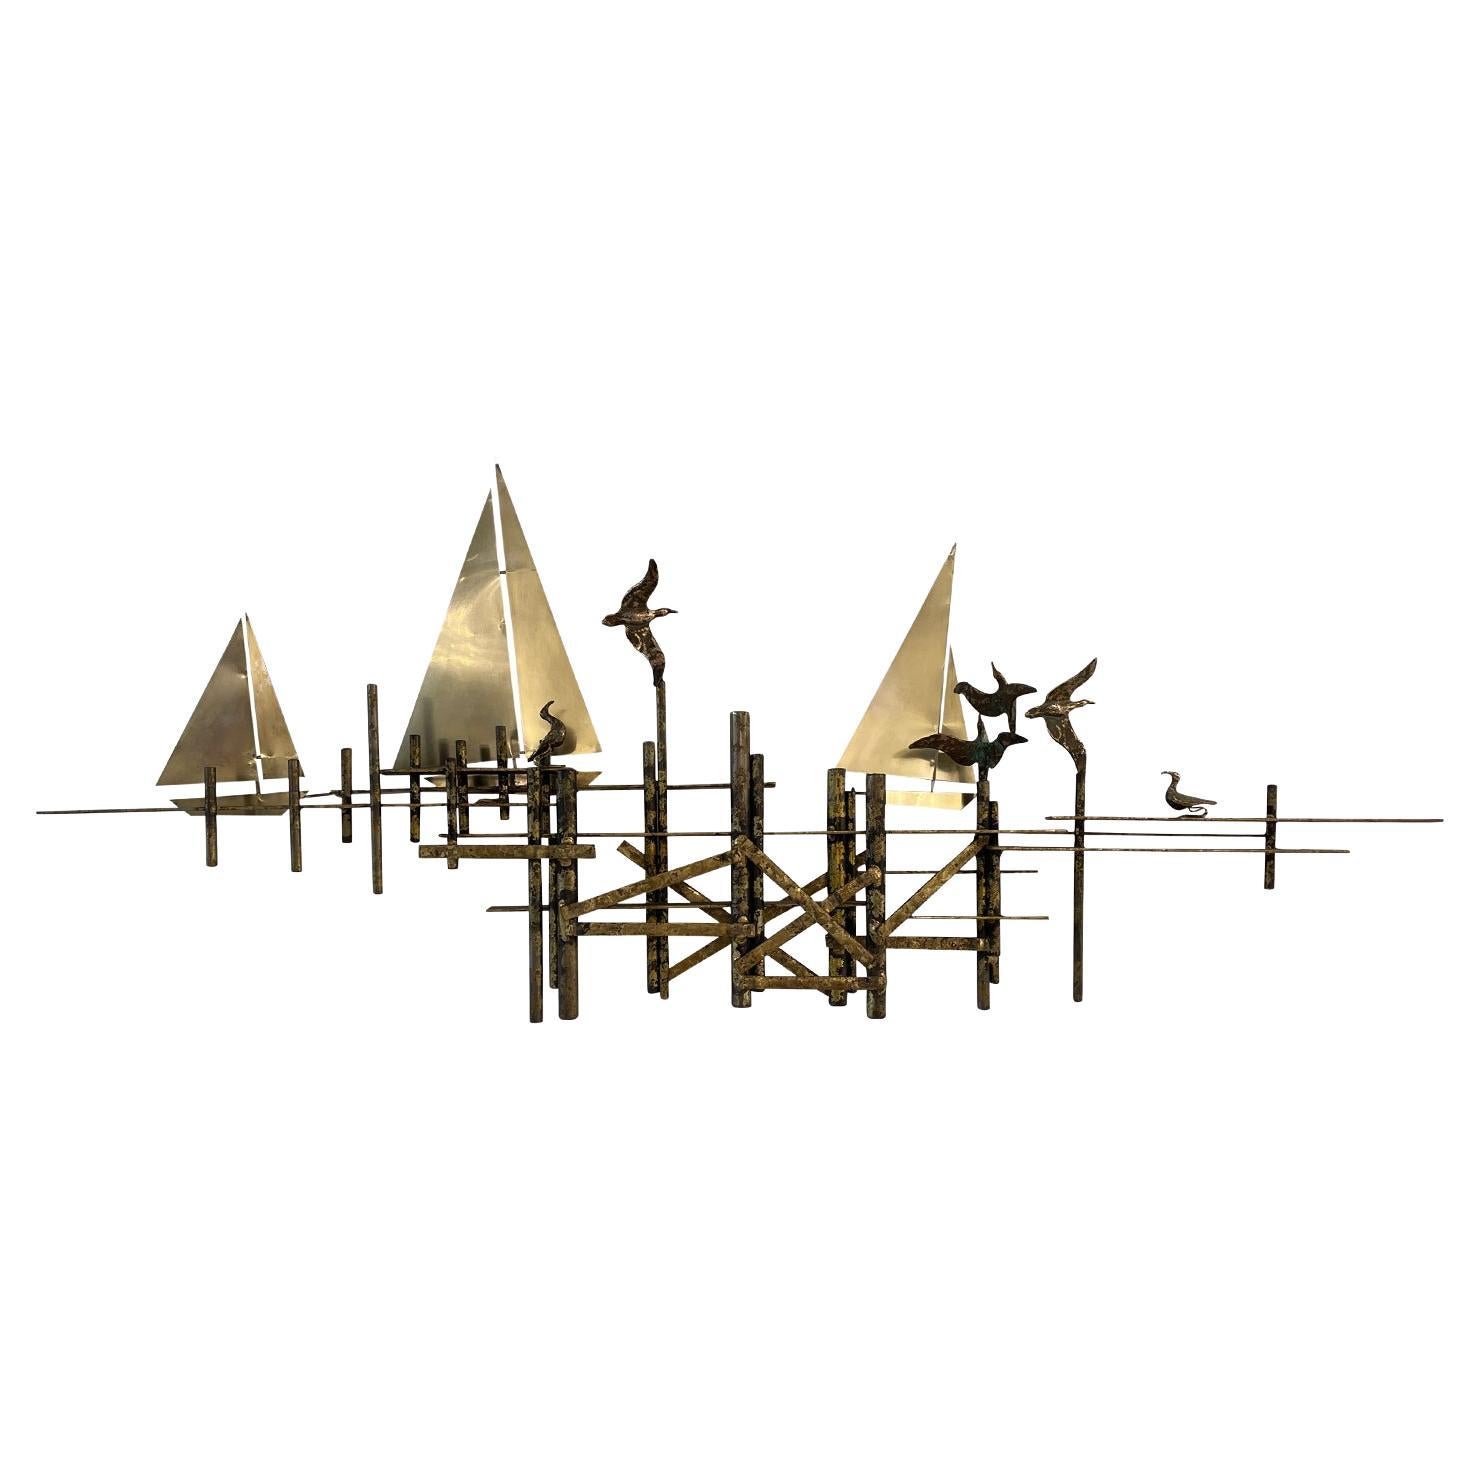 20th Century American Metal Birds and Sailboats Wall Sculpture by Curtis Jere